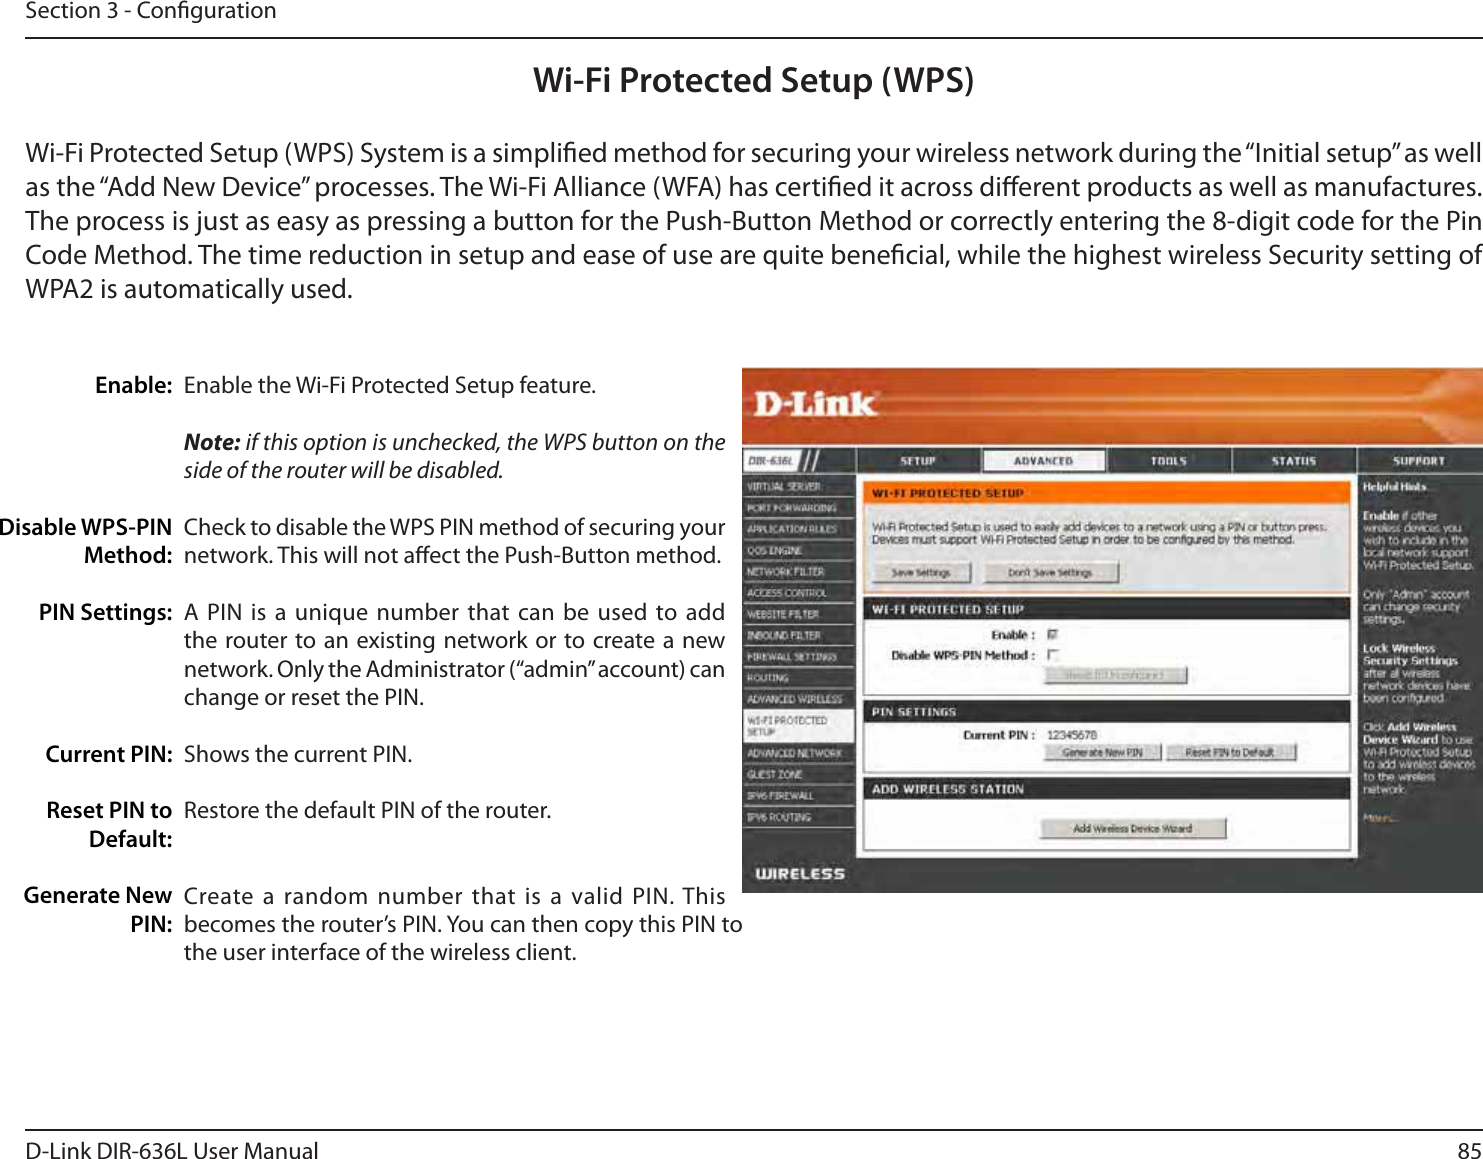 85D-Link DIR-636L User ManualSection 3 - CongurationWi-Fi Protected Setup (WPS)Enable the Wi-Fi Protected Setup feature. Note: if this option is unchecked, the WPS button on the side of the router will be disabled.Check to disable the WPS PIN method of securing your network. This will not aect the Push-Button method.A PIN is a unique number that can be used to add the router to an existing network or to create a new network. Only the Administrator (“admin” account) can change or reset the PIN. Shows the current PIN. Restore the default PIN of the router. Create a random number that is a valid PIN. This becomes the router’s PIN. You can then copy this PIN to the user interface of the wireless client.Enable:Disable WPS-PIN Method:PIN Settings:Current PIN:Reset PIN to Default:Generate New PIN:Wi-Fi Protected Setup (WPS) System is a simplied method for securing your wireless network during the “Initial setup” as well as the “Add New Device” processes. The Wi-Fi Alliance (WFA) has certied it across dierent products as well as manufactures. The process is just as easy as pressing a button for the Push-Button Method or correctly entering the 8-digit code for the Pin Code Method. The time reduction in setup and ease of use are quite benecial, while the highest wireless Security setting of WPA2 is automatically used.